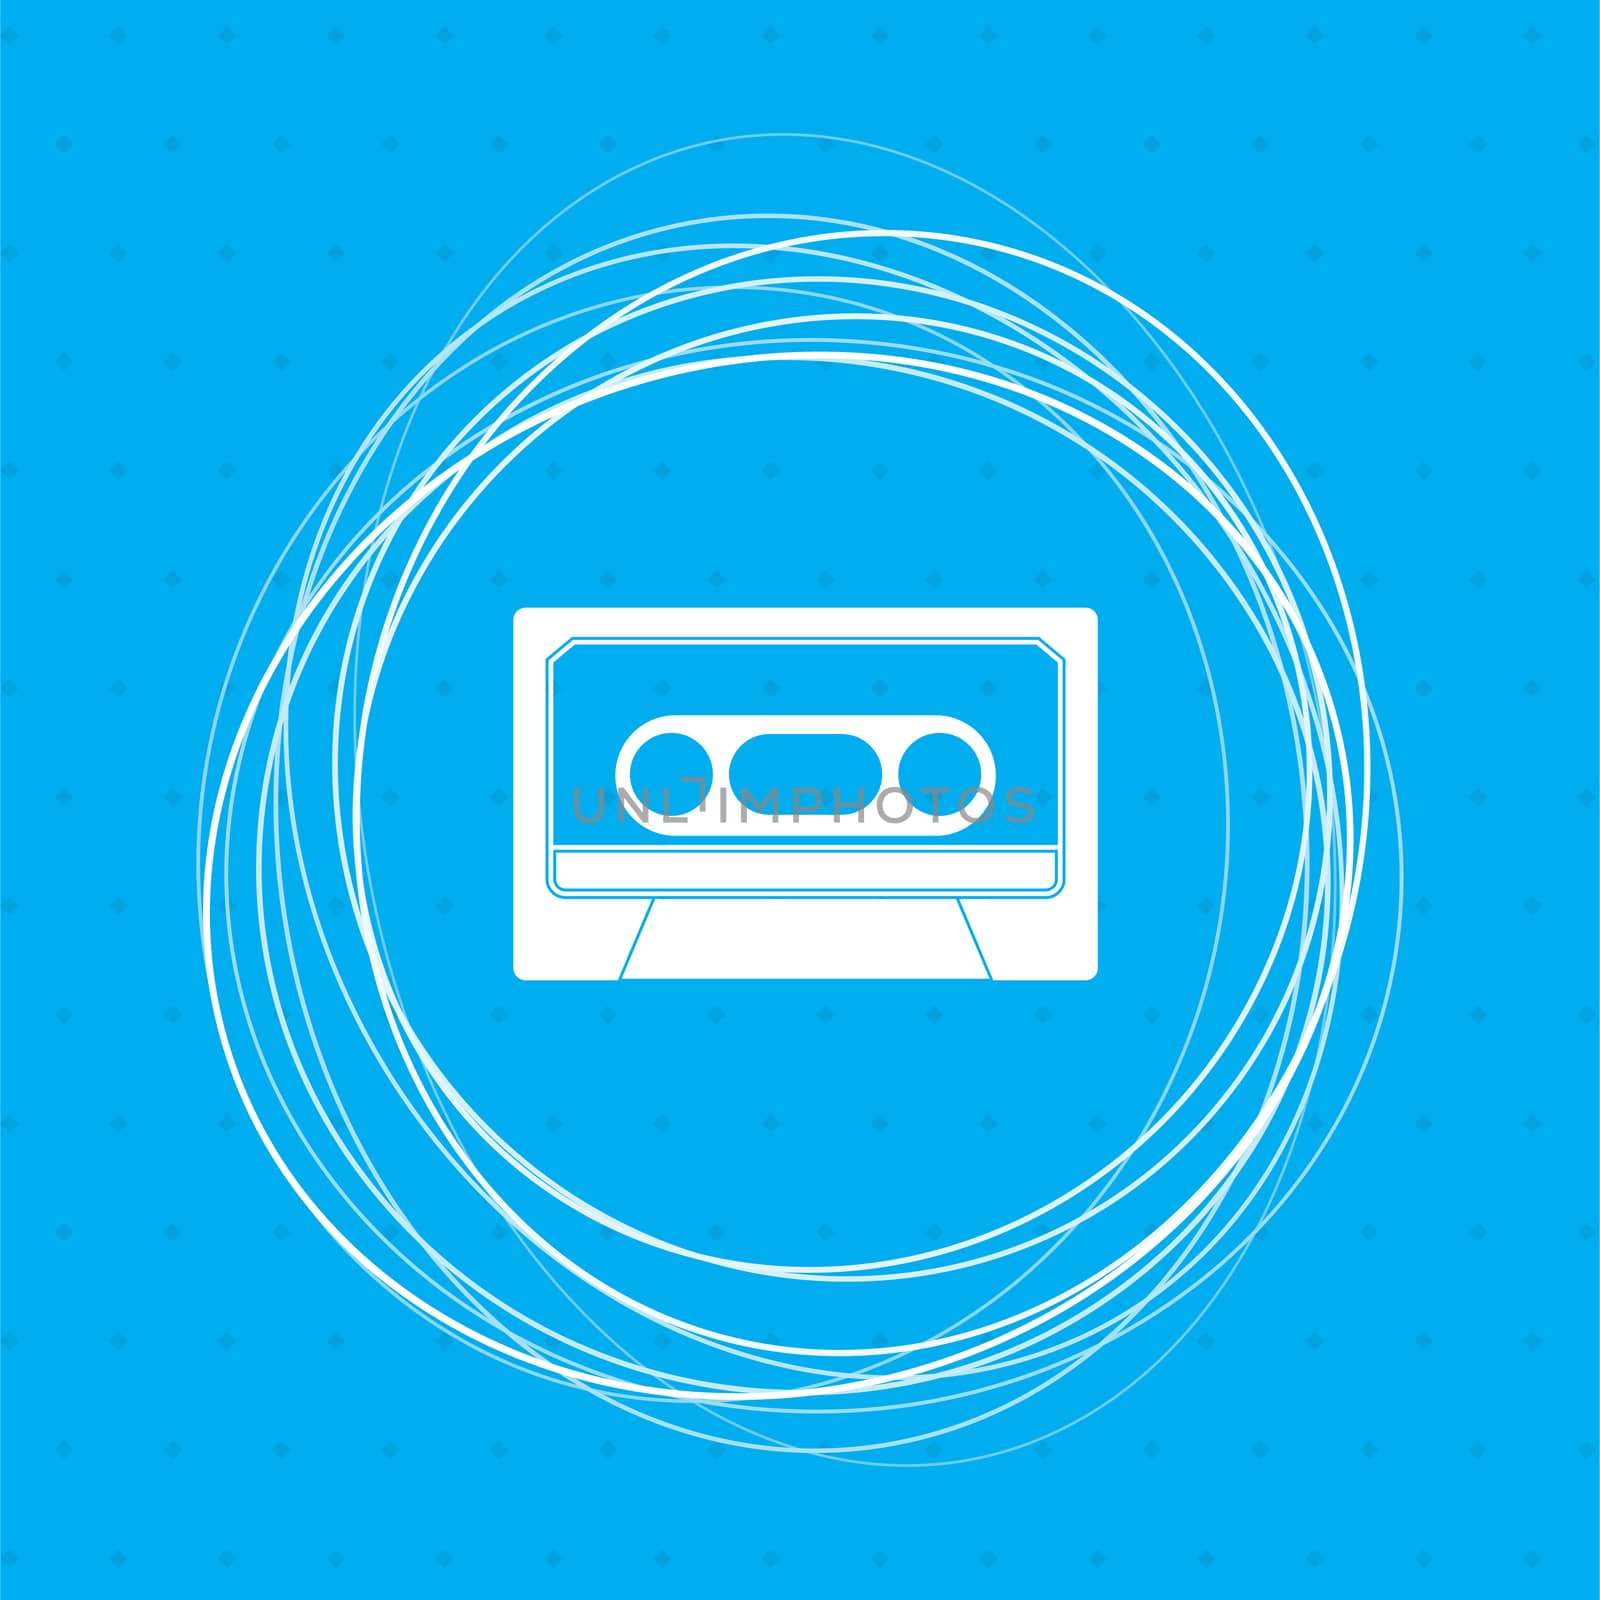 Cassette icon on a blue background with abstract circles around and place for your text.  by Adamchuk